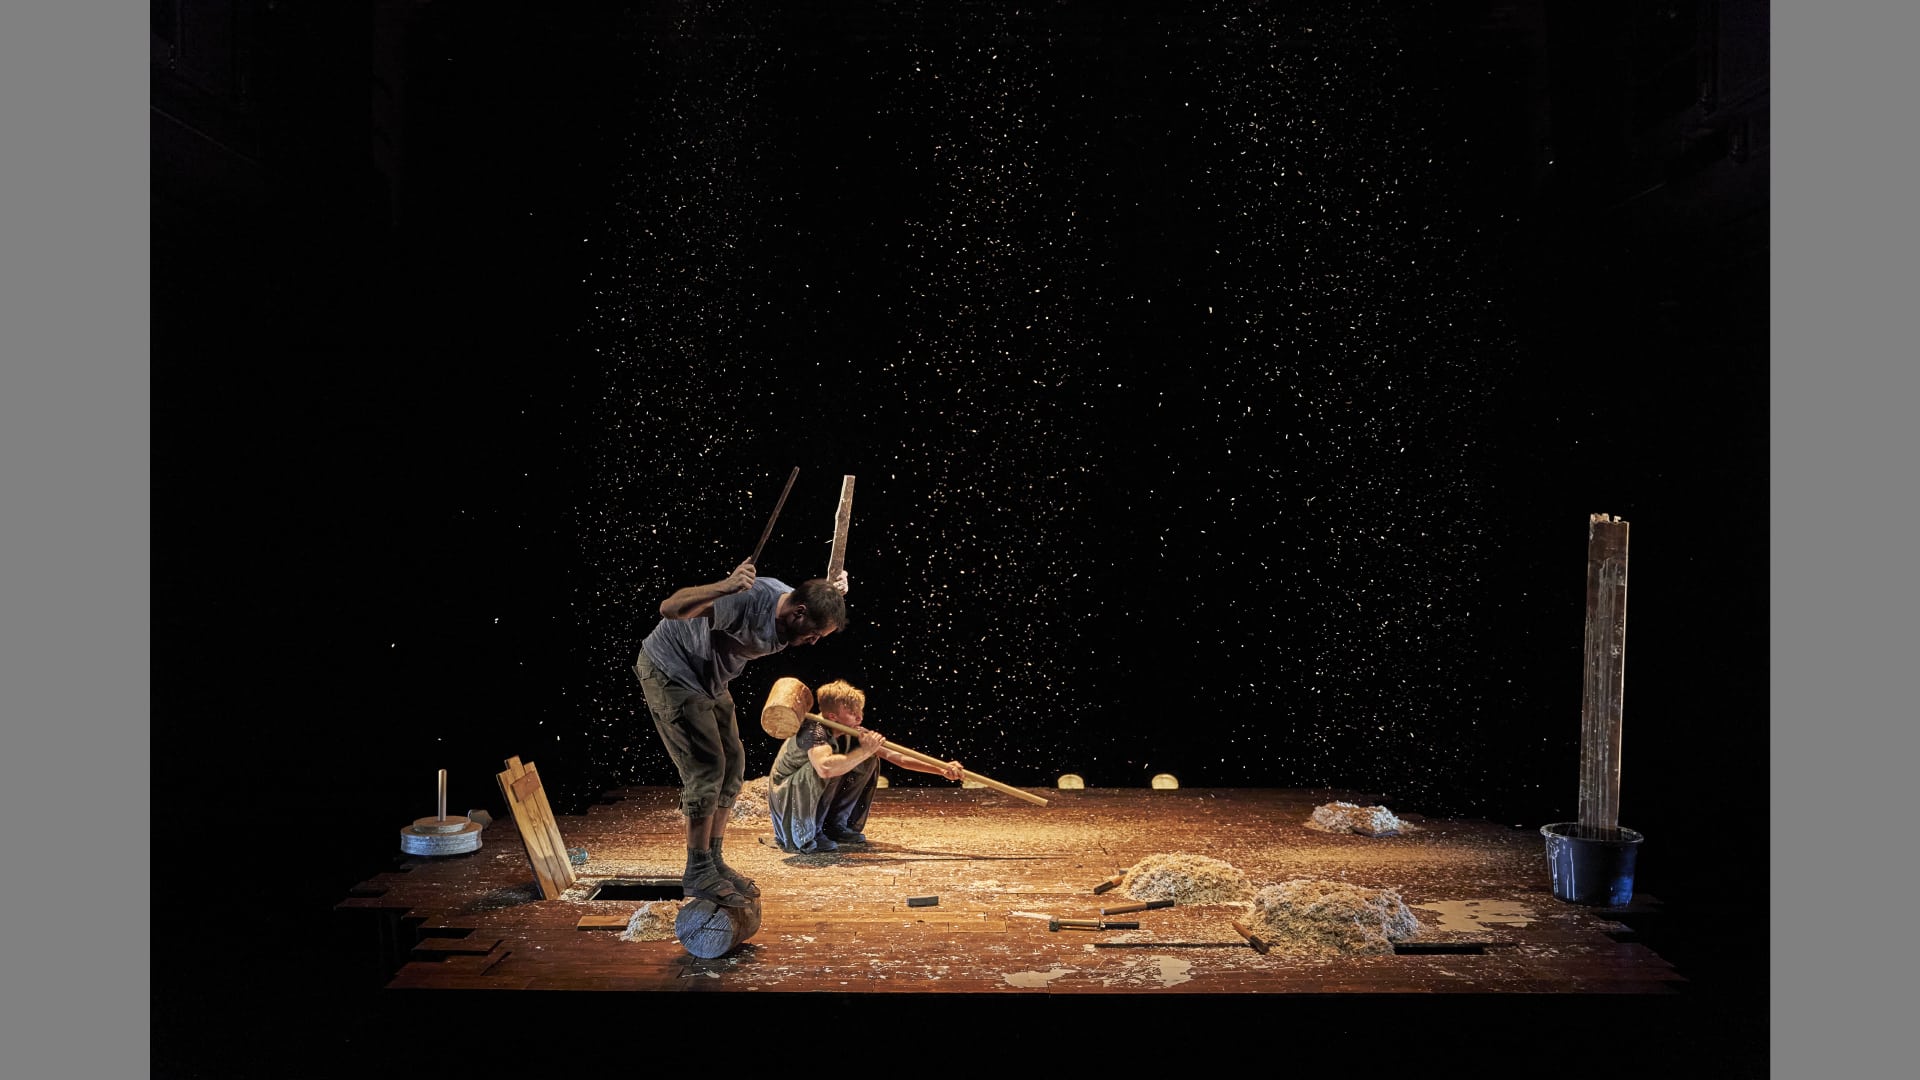 A performer balances in a rolling log, while another crouches down holding a massive hammer